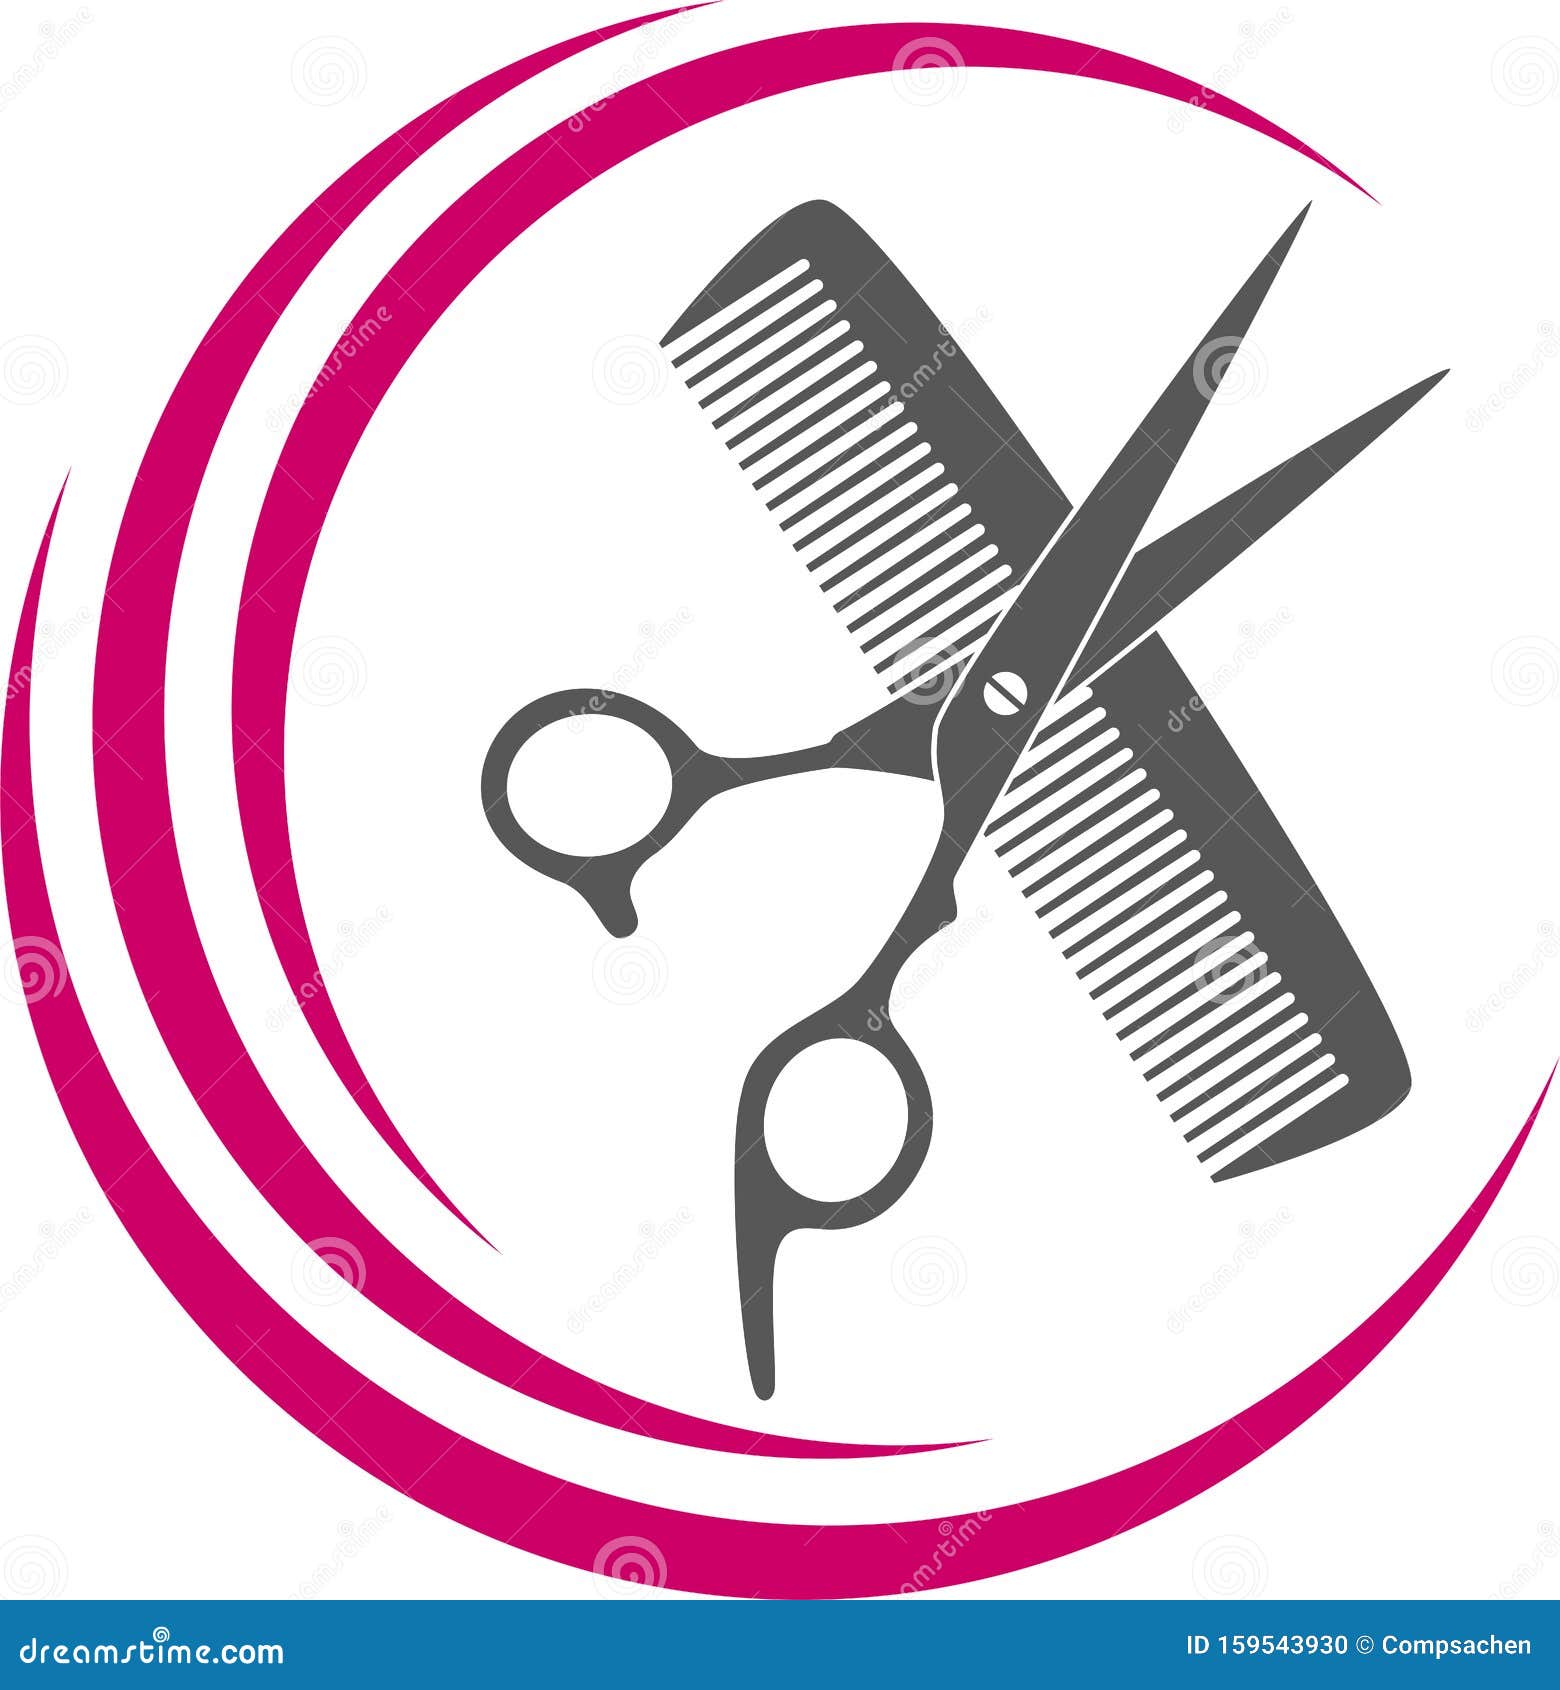 scissors, comb and razor in black, hairdresser and barber tools logo